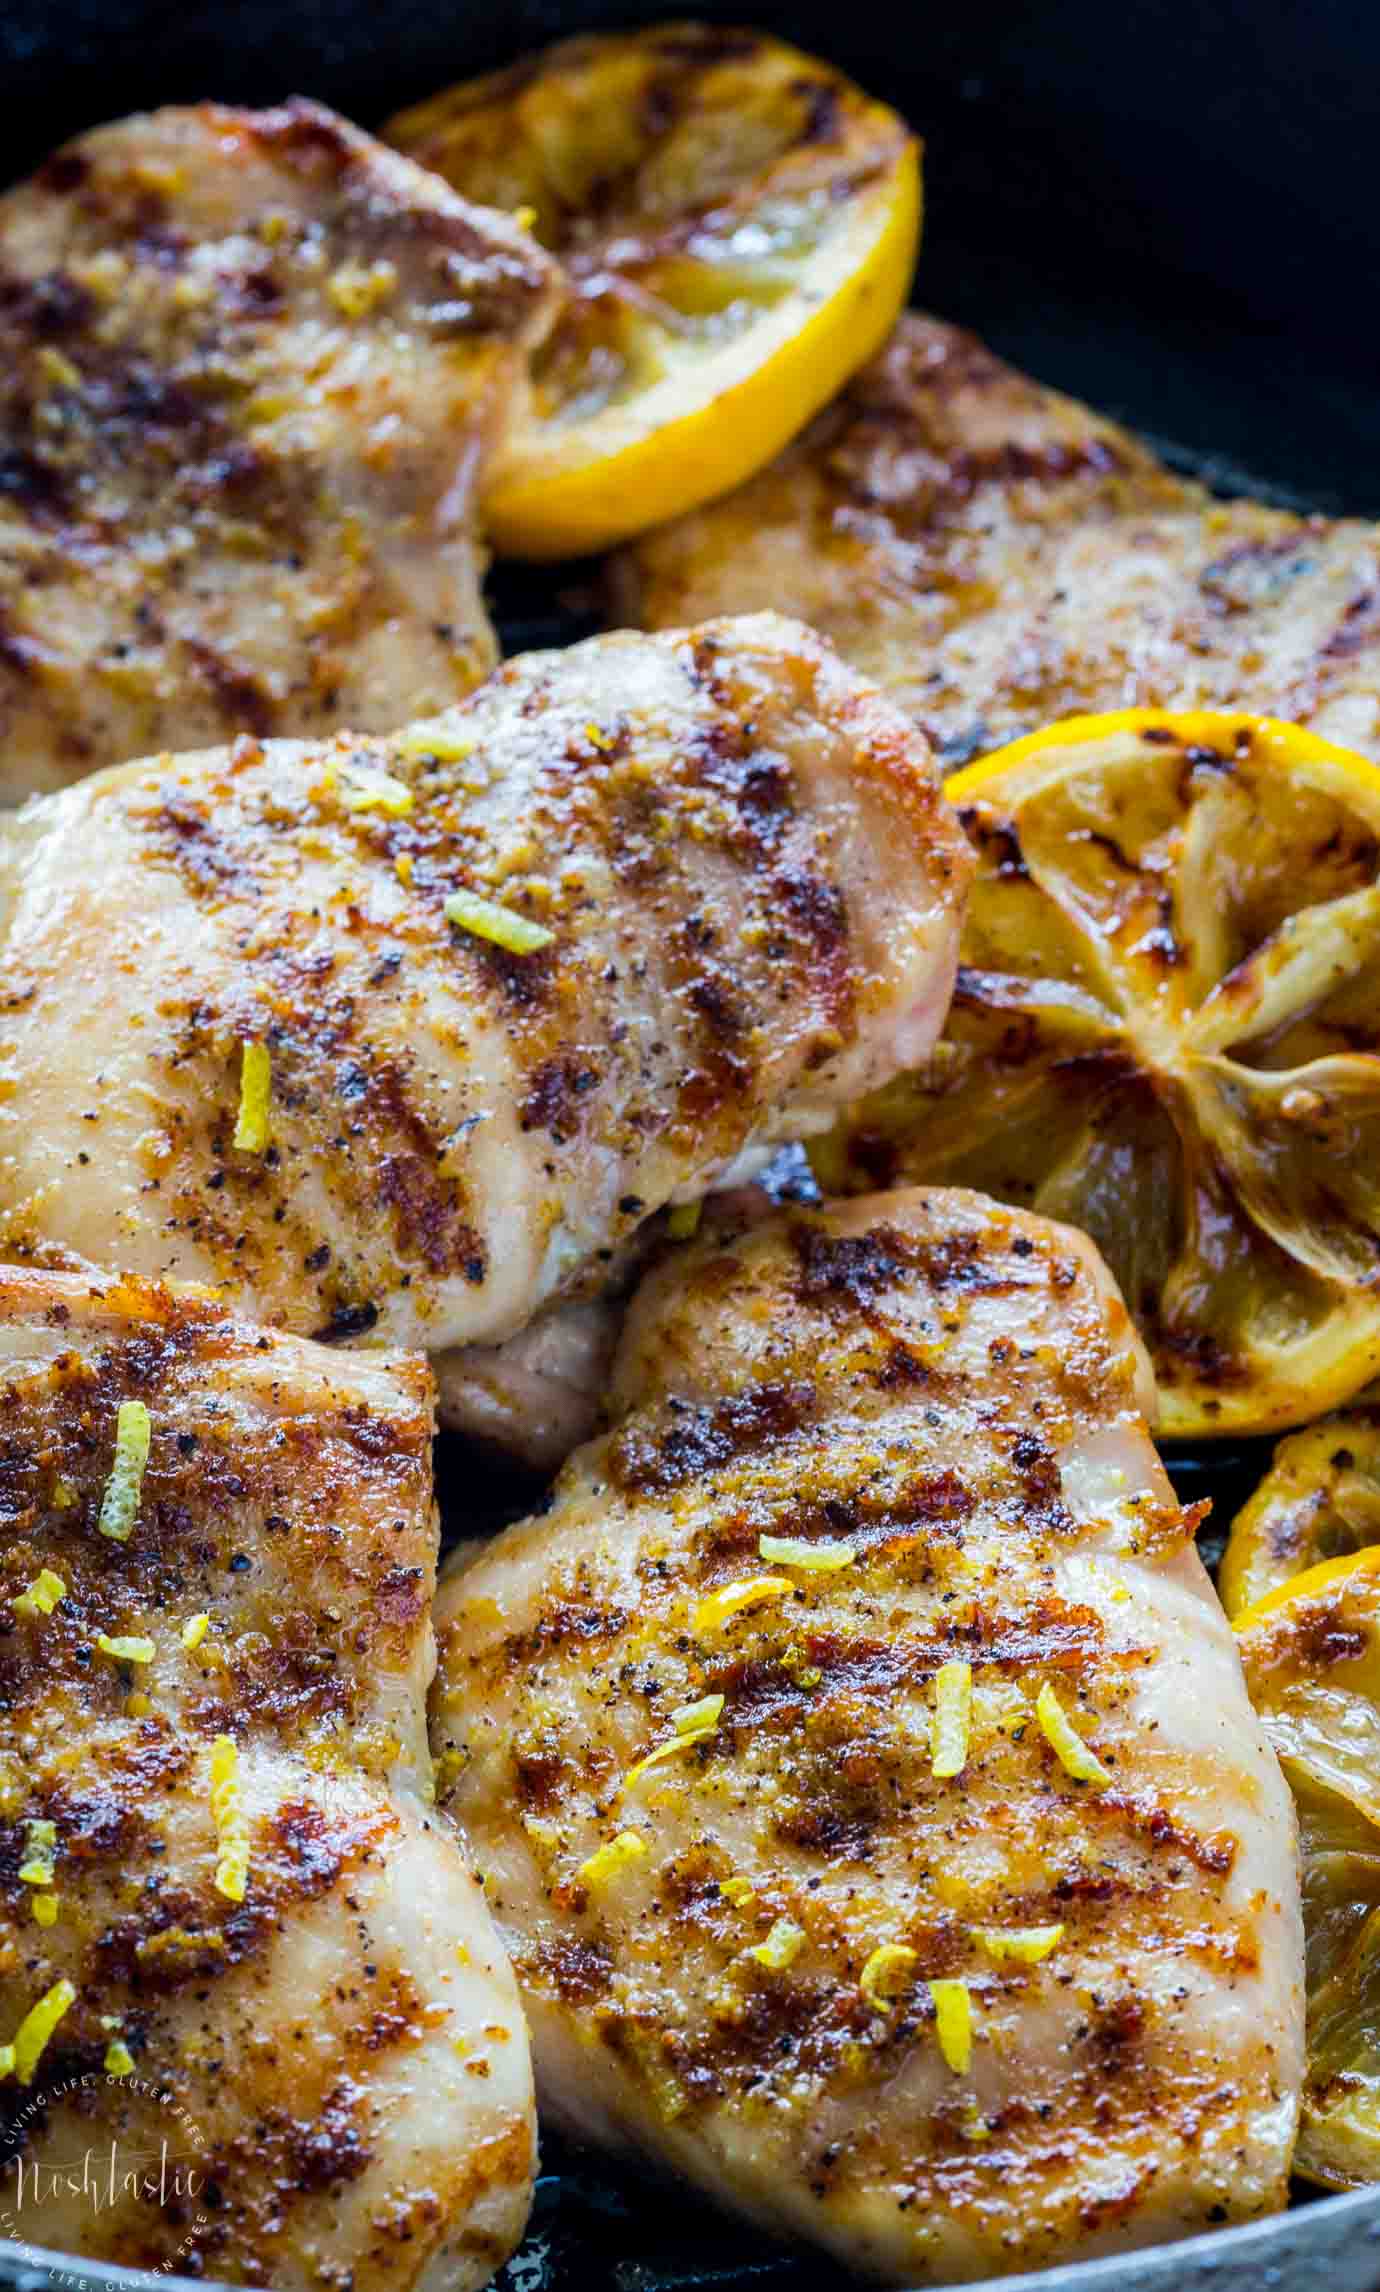 Healthy Lemon Pepper Chicken with a perfect homemade, from scratch, seasoning! Contains lemon zest, garlic, salt, pepper, and onion powder, it's gluten free, dairy free, paleo, whole30, low carb and healthy! You can pan fry it, bake it in the oven, or make it on the grill, it's so easy!